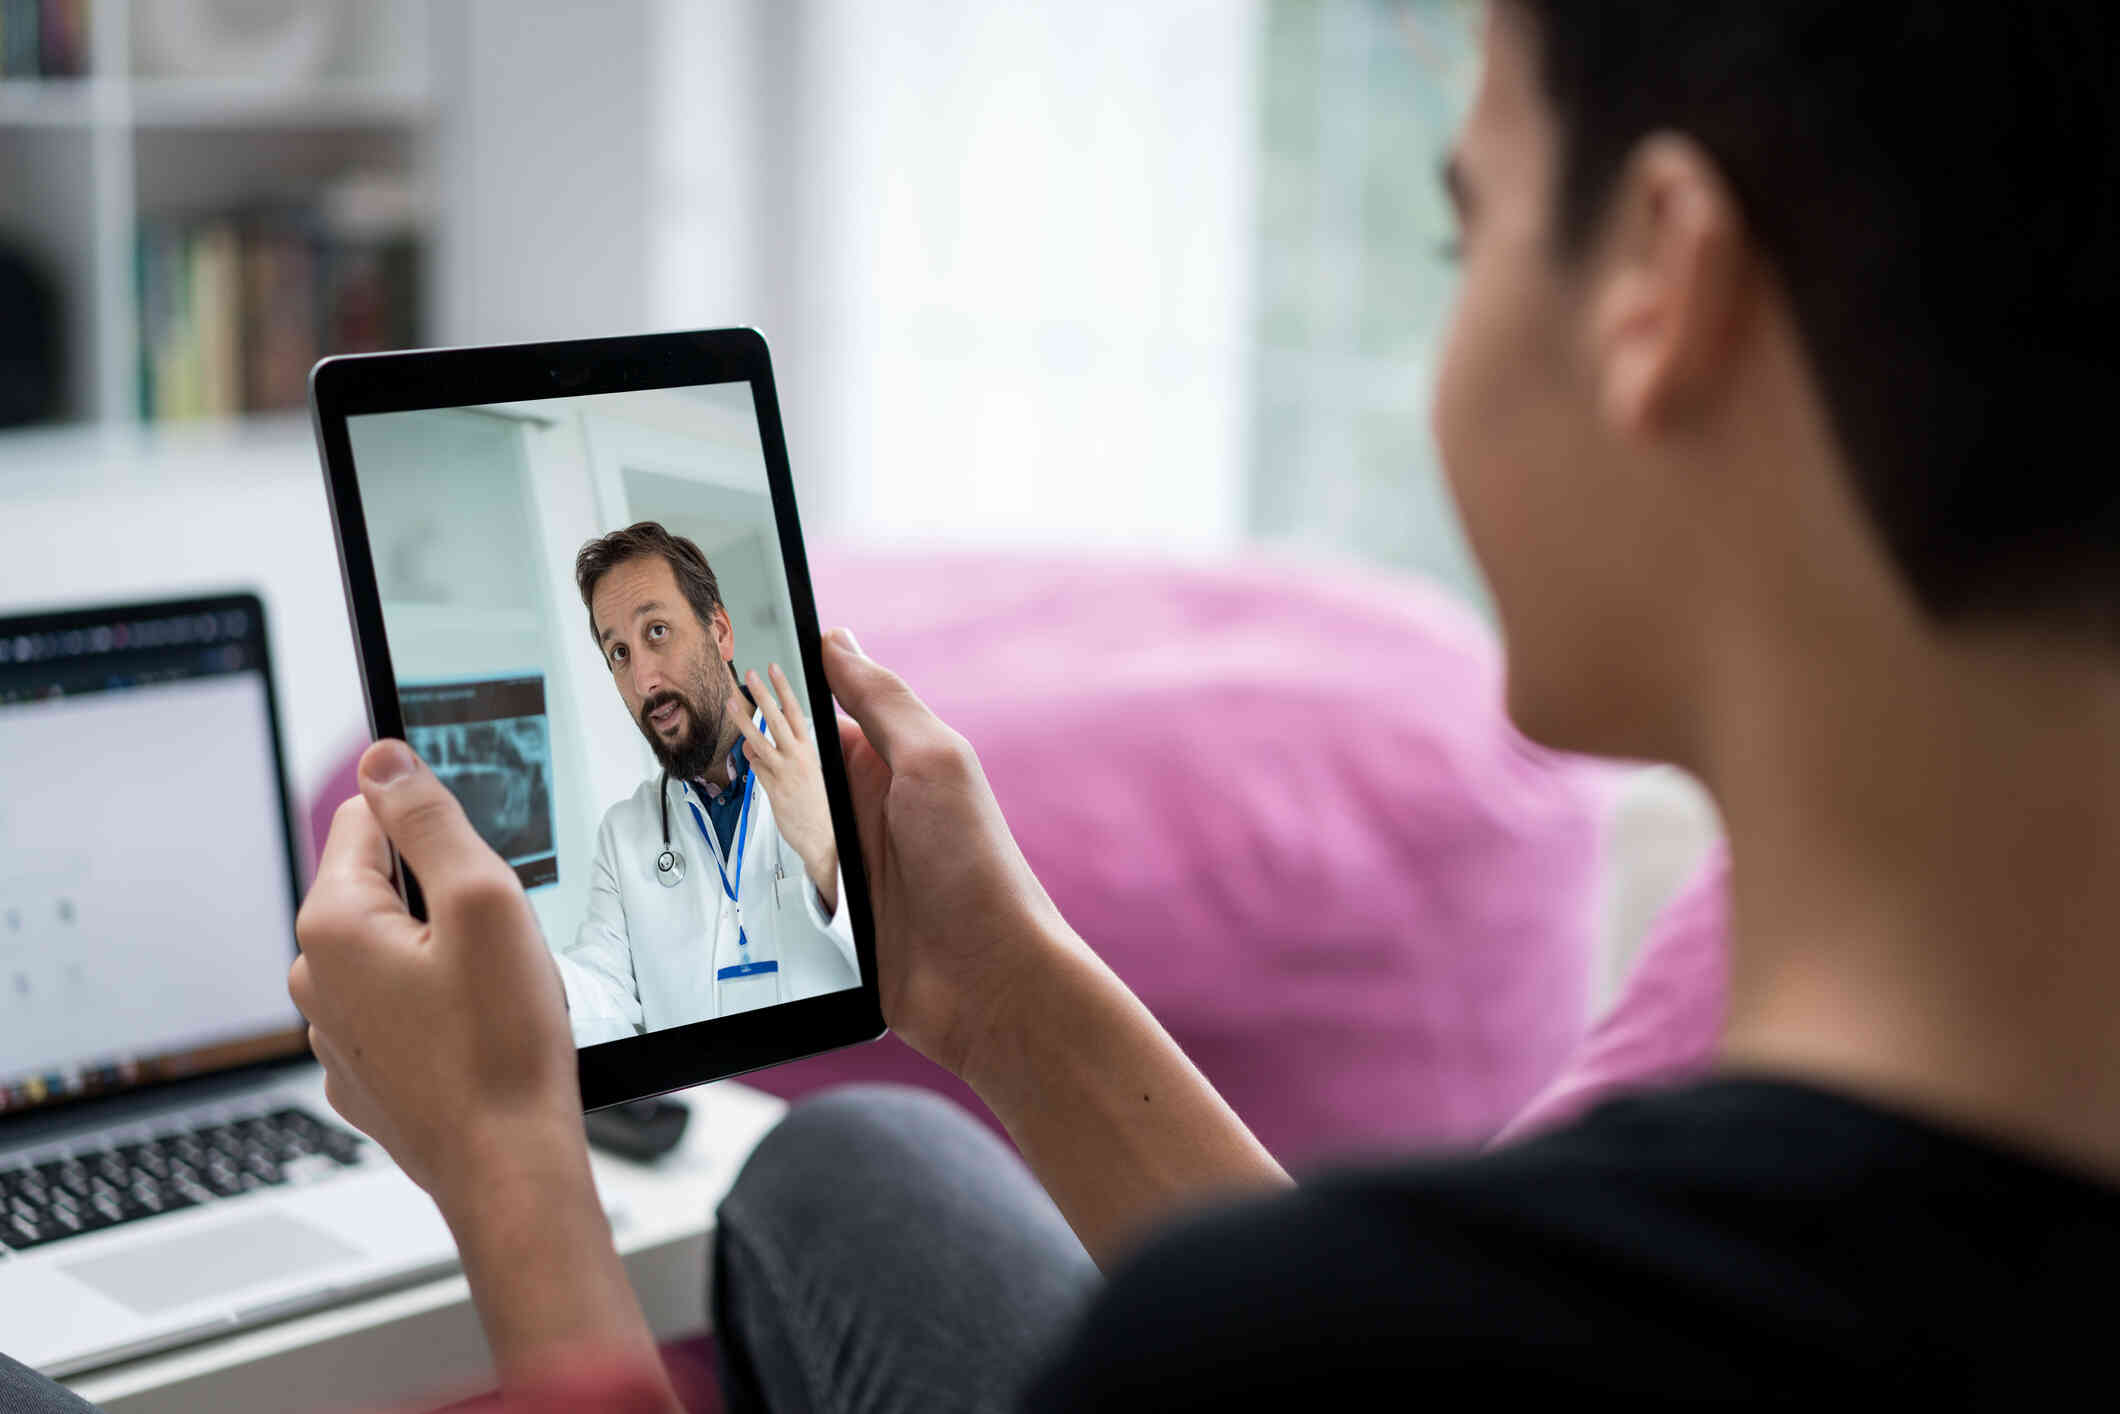 A close up of a woman holding a tablet in her hand while talking to the  male doctor on the screen during a telehealth call.